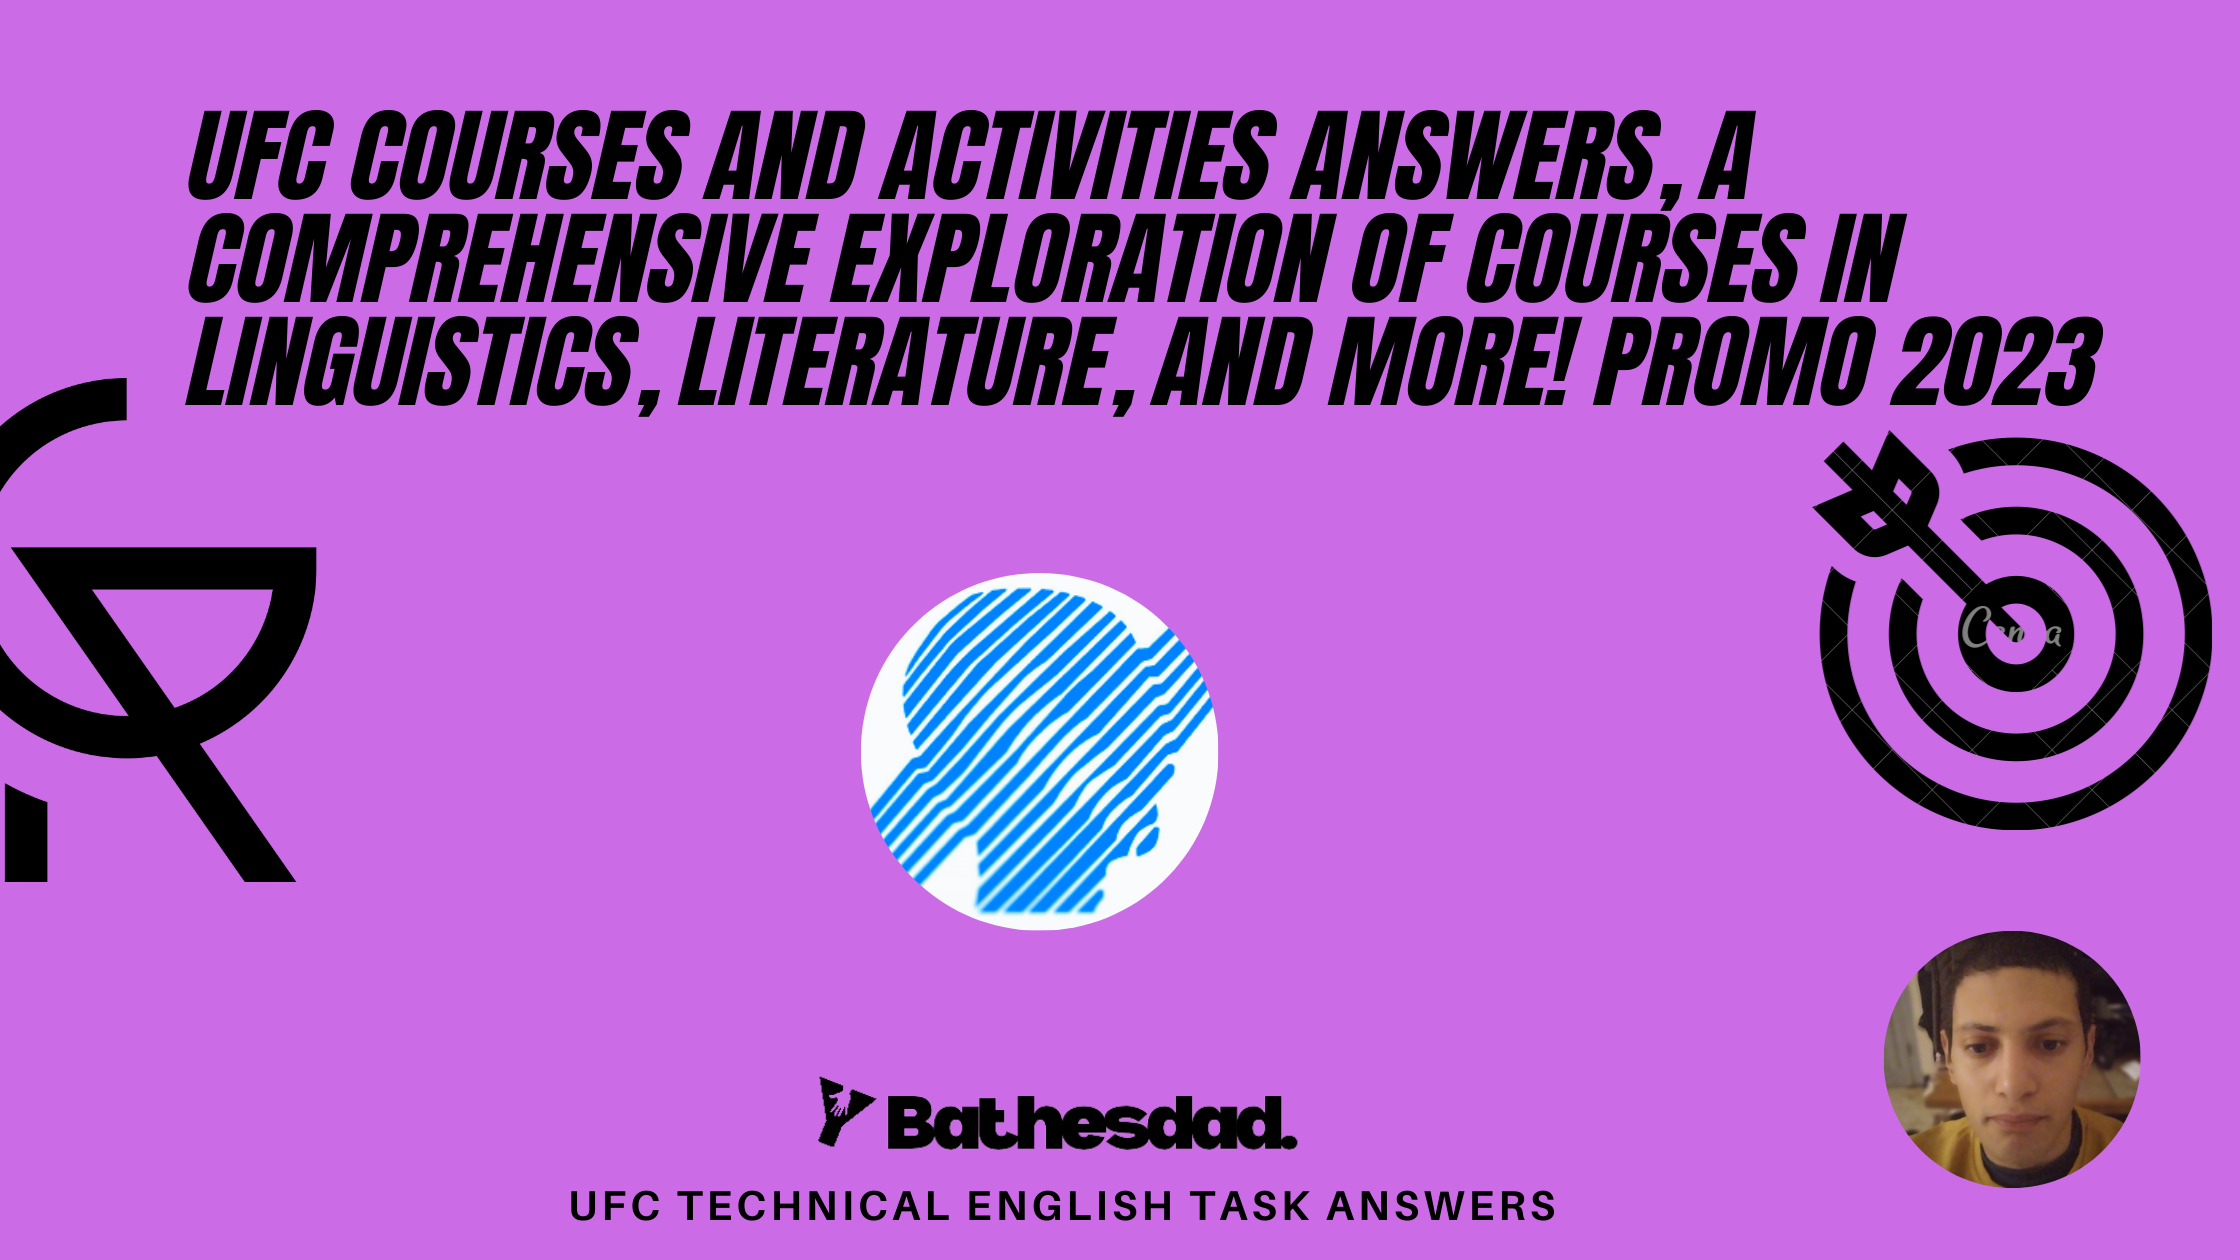 UFC courses and activities answers, A Comprehensive Exploration of Courses in Linguistics, Literature, and More! Promo 2023